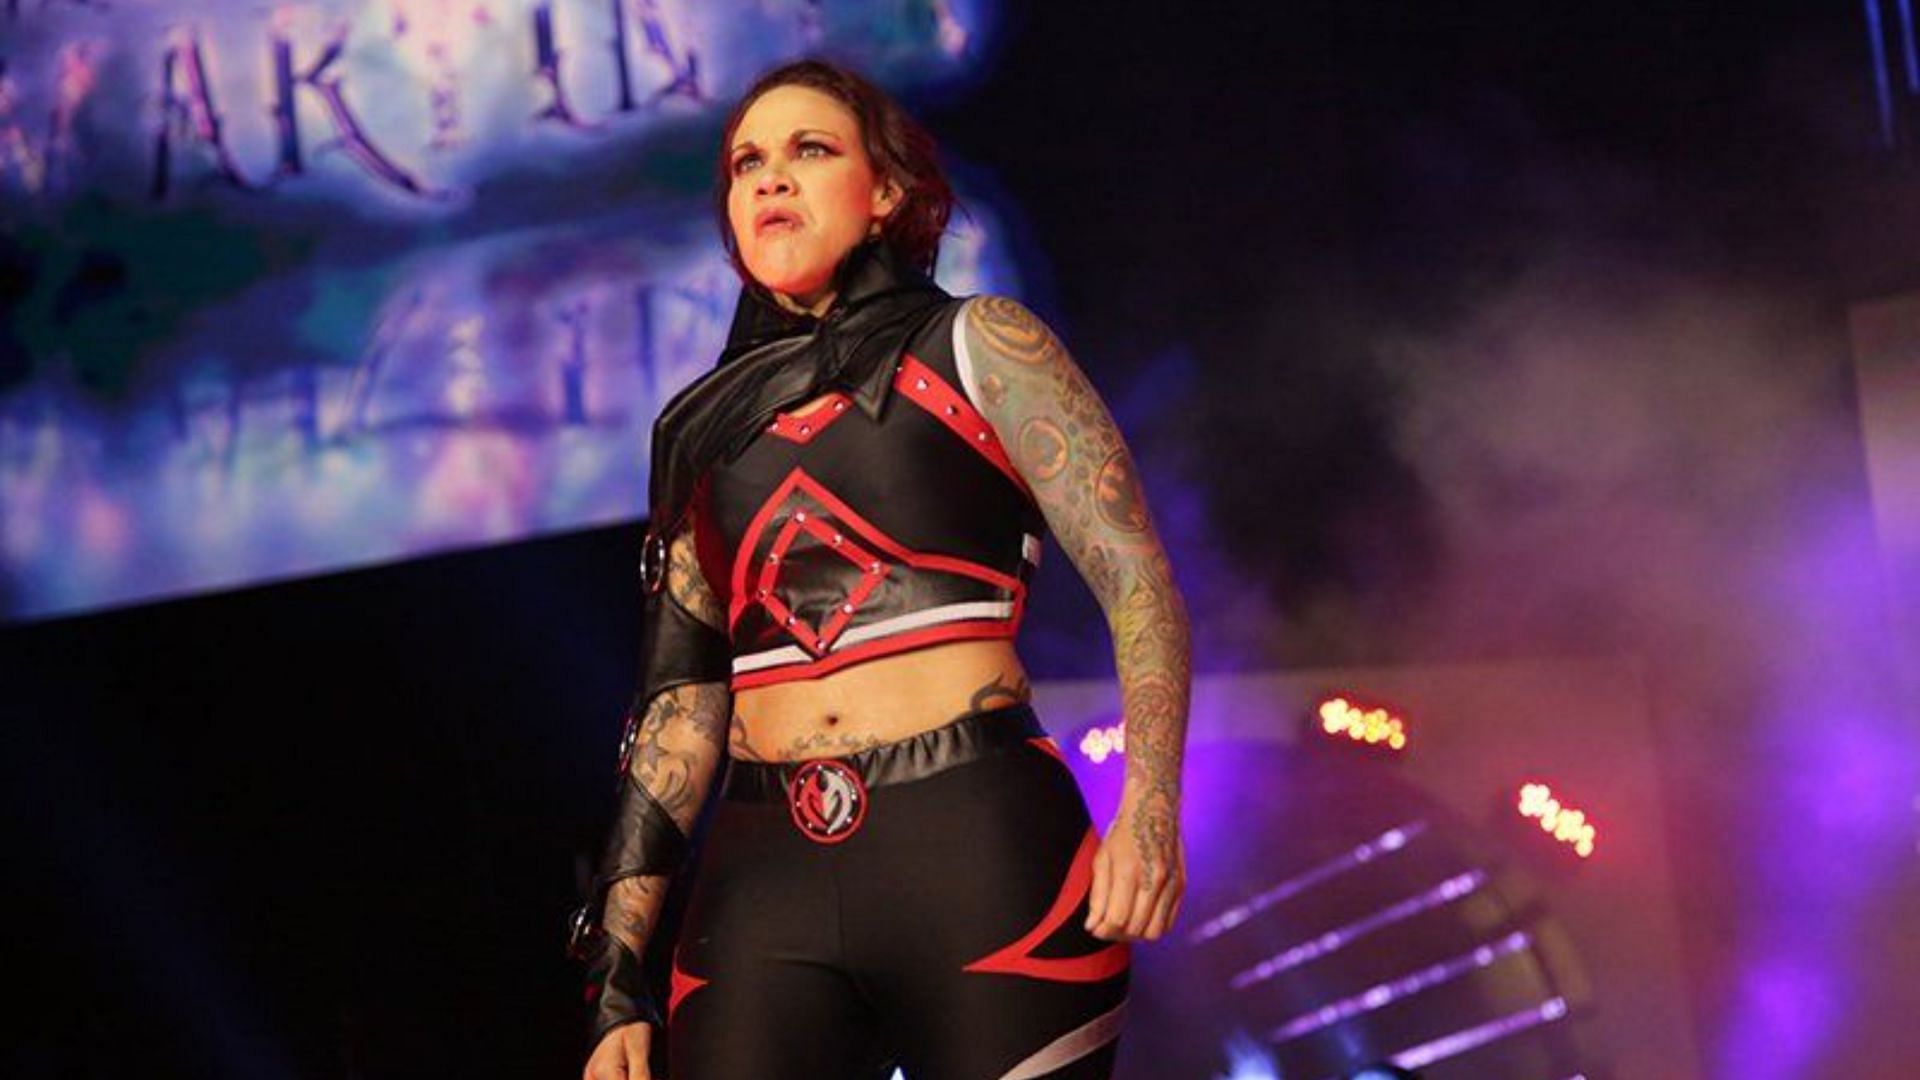 Mercedes Martinez competed for a few months in IMPACT Wrestling